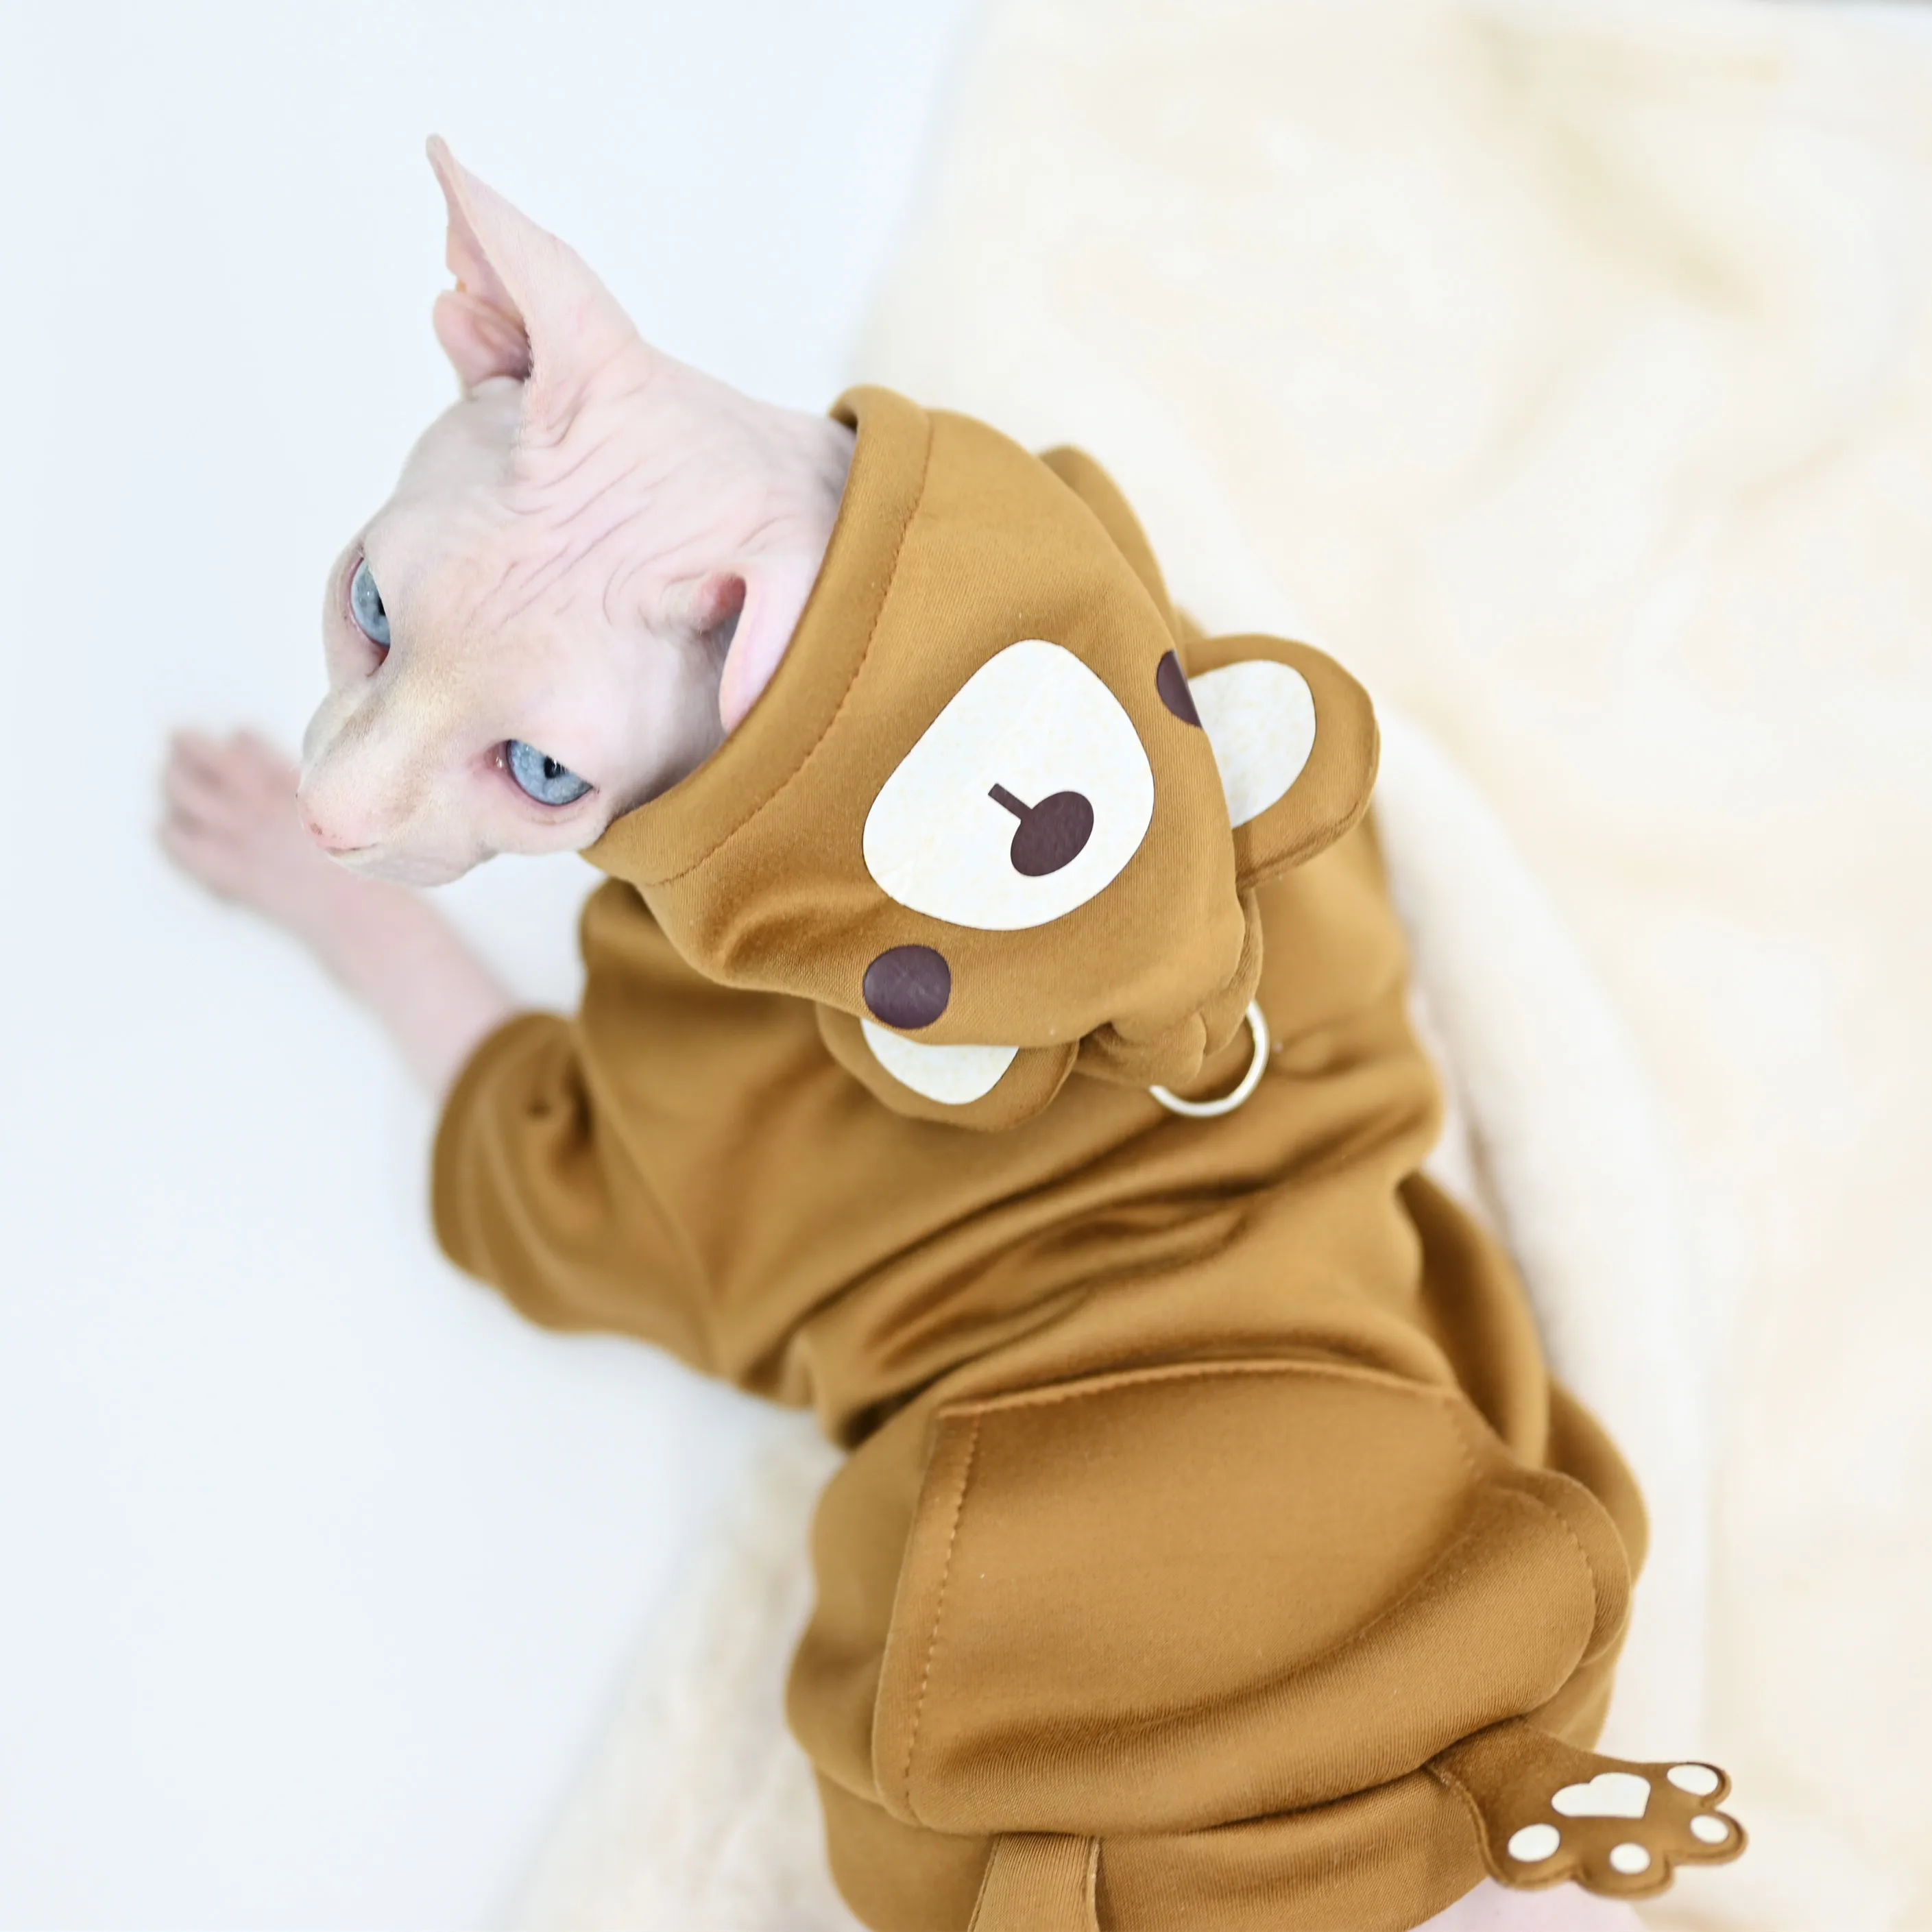 

Hairless Cat Clothes Devon Clothes Funny Kitten Clothes Soft Autumn Pet Anti Hair Loss Hoodie Clothes for Cats